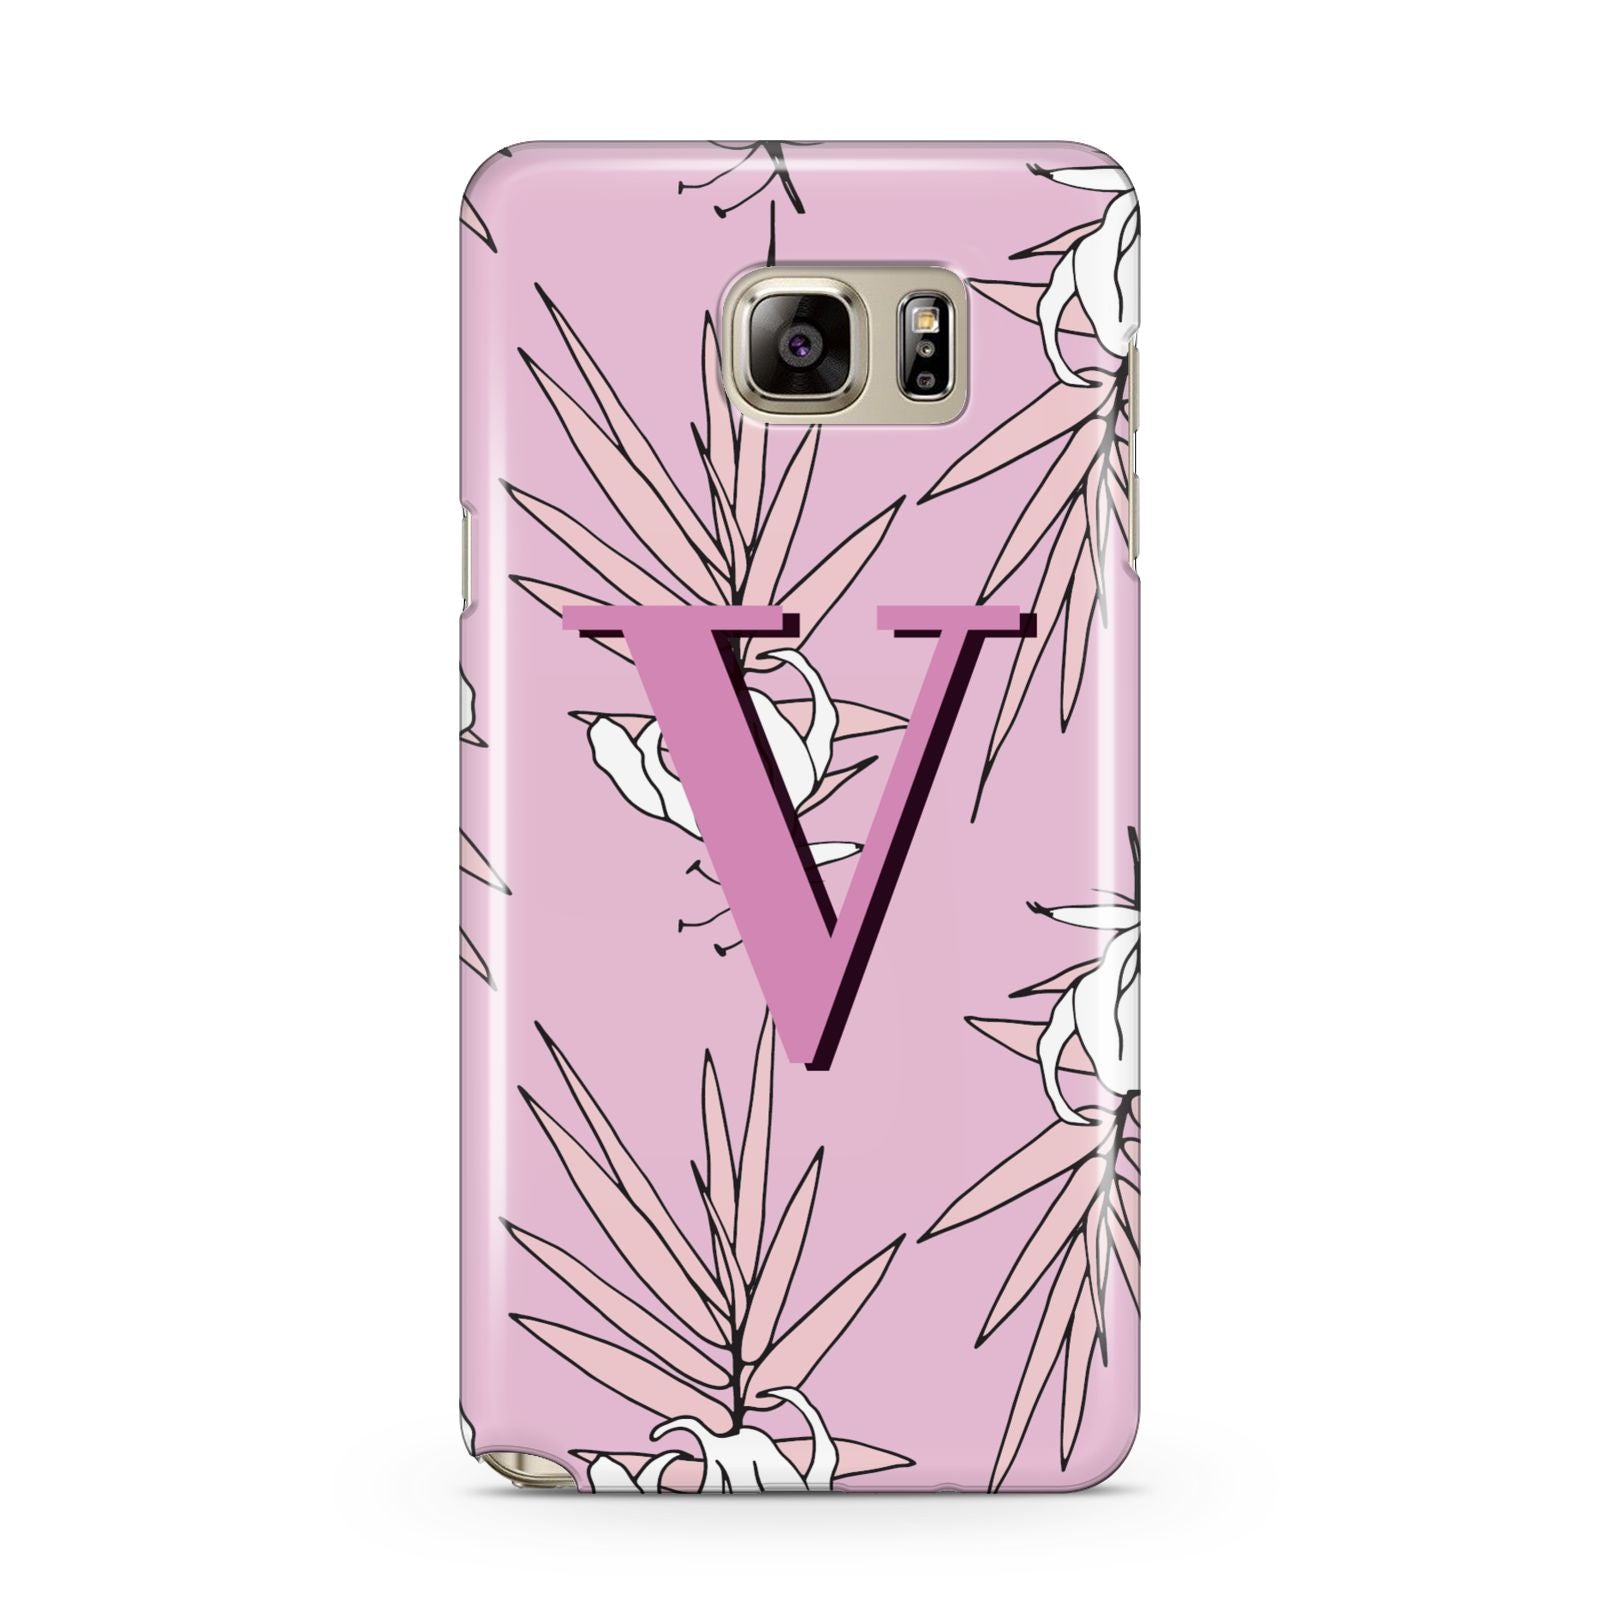 Personalised Pink and White Floral Monogram Samsung Galaxy Note 5 Case